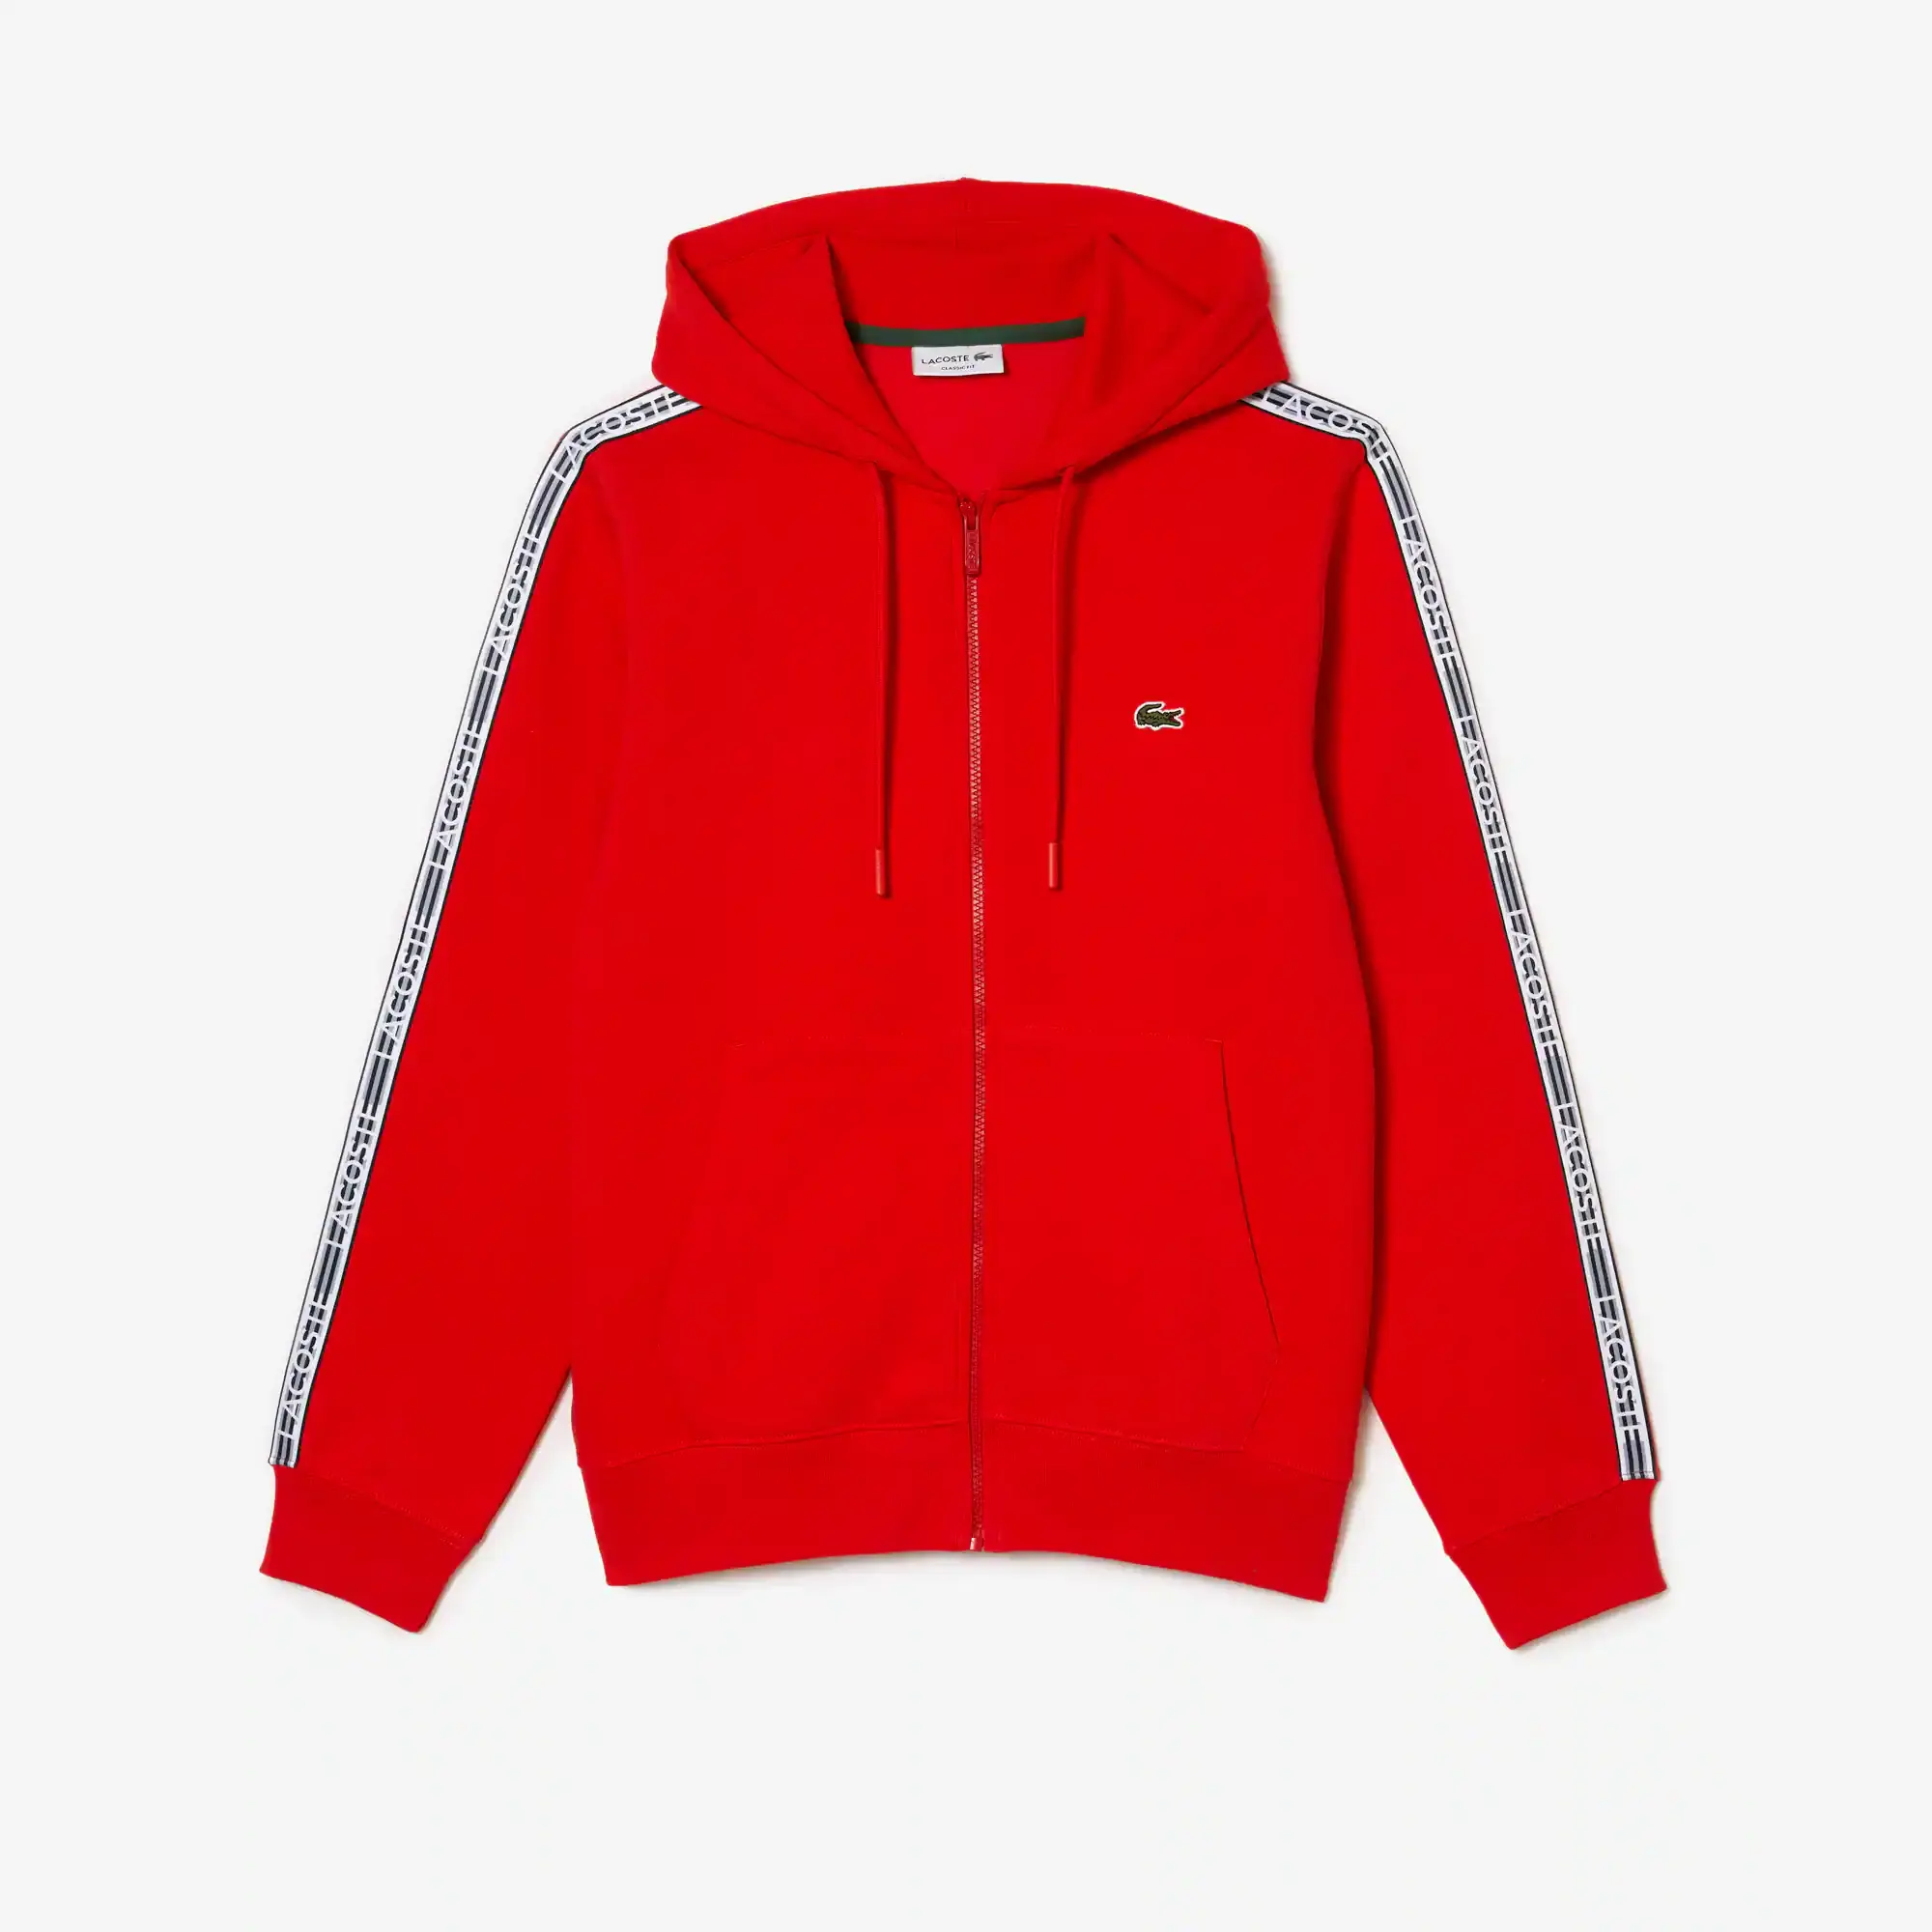 Lacoste Men’s Classic Fit Branded Stripes Zip-Up Hoodie. 2